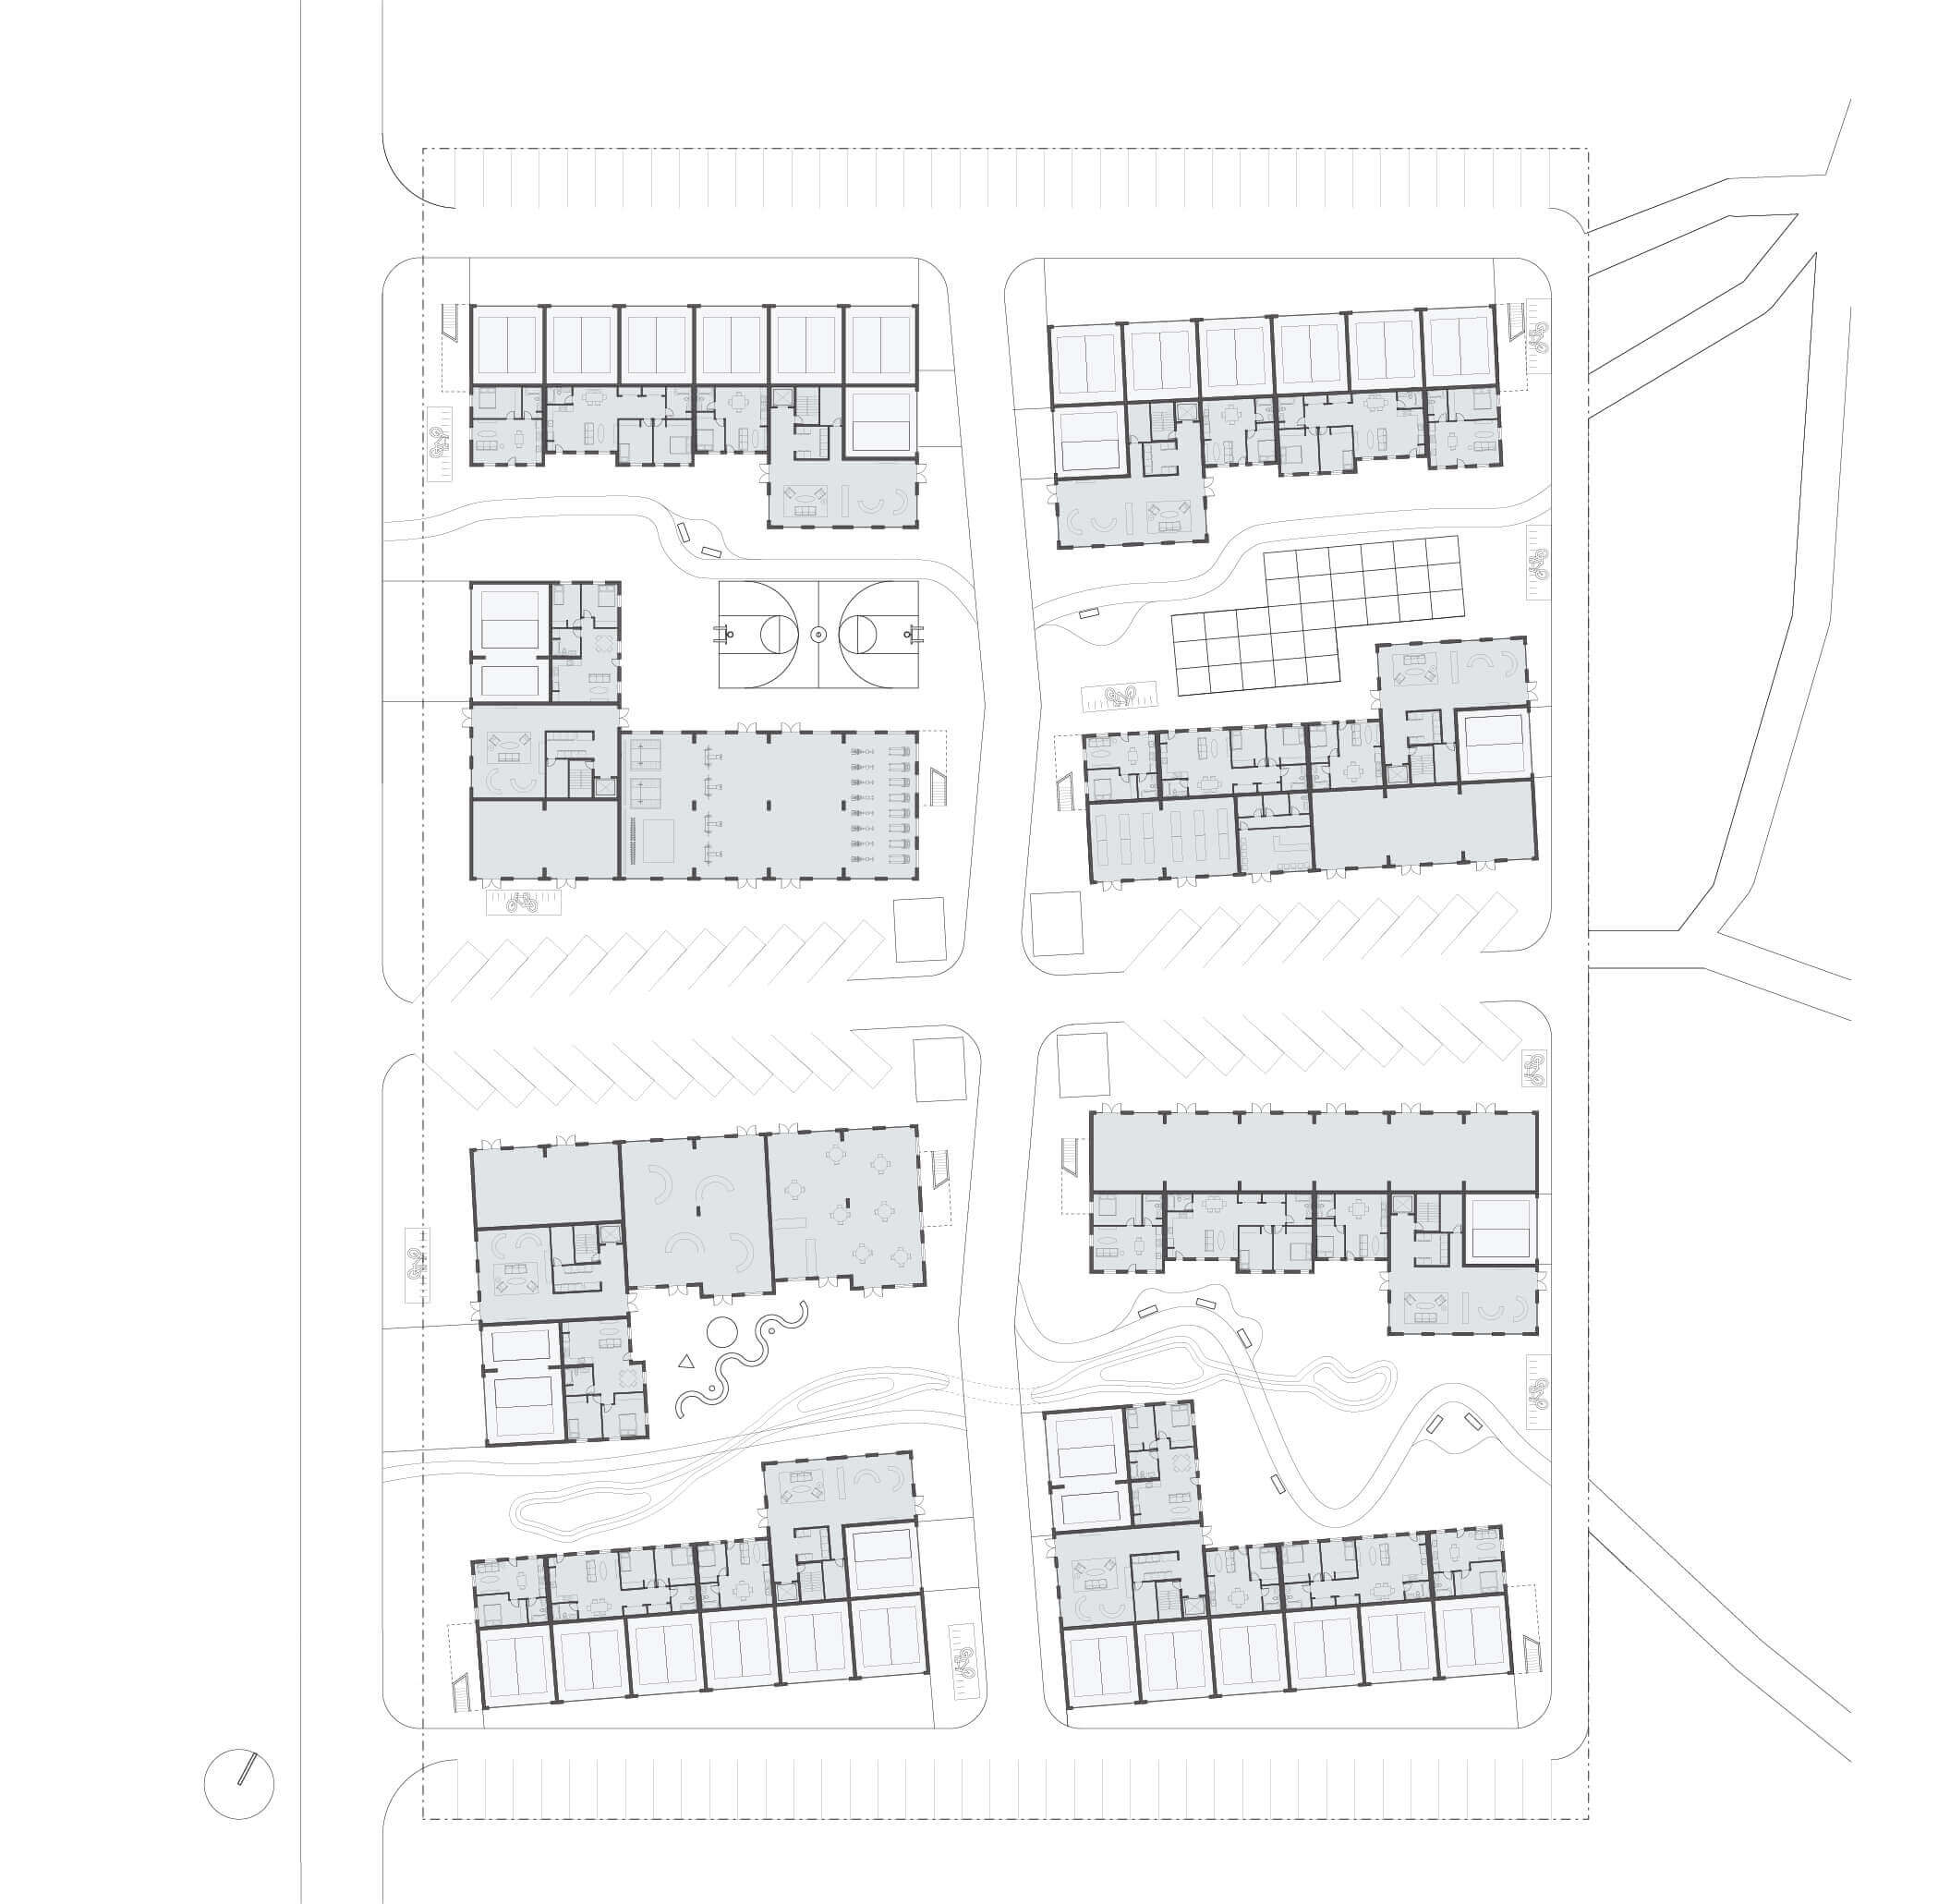 Floor plan of a housing project